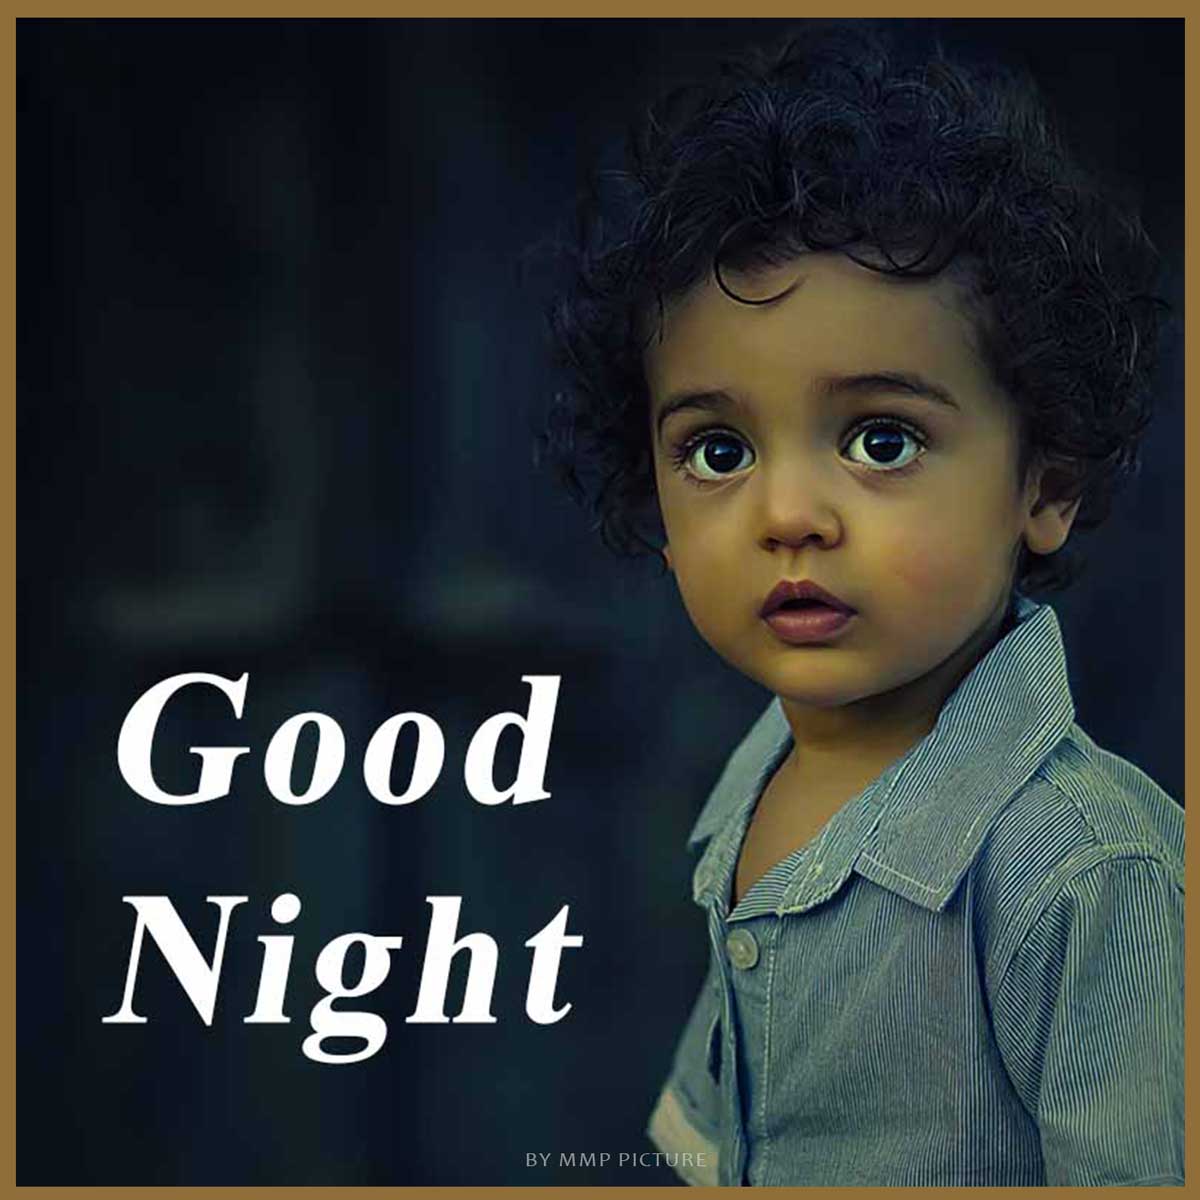 Cute Baby Boy Good Night Image For Whatsapp [ Download ]